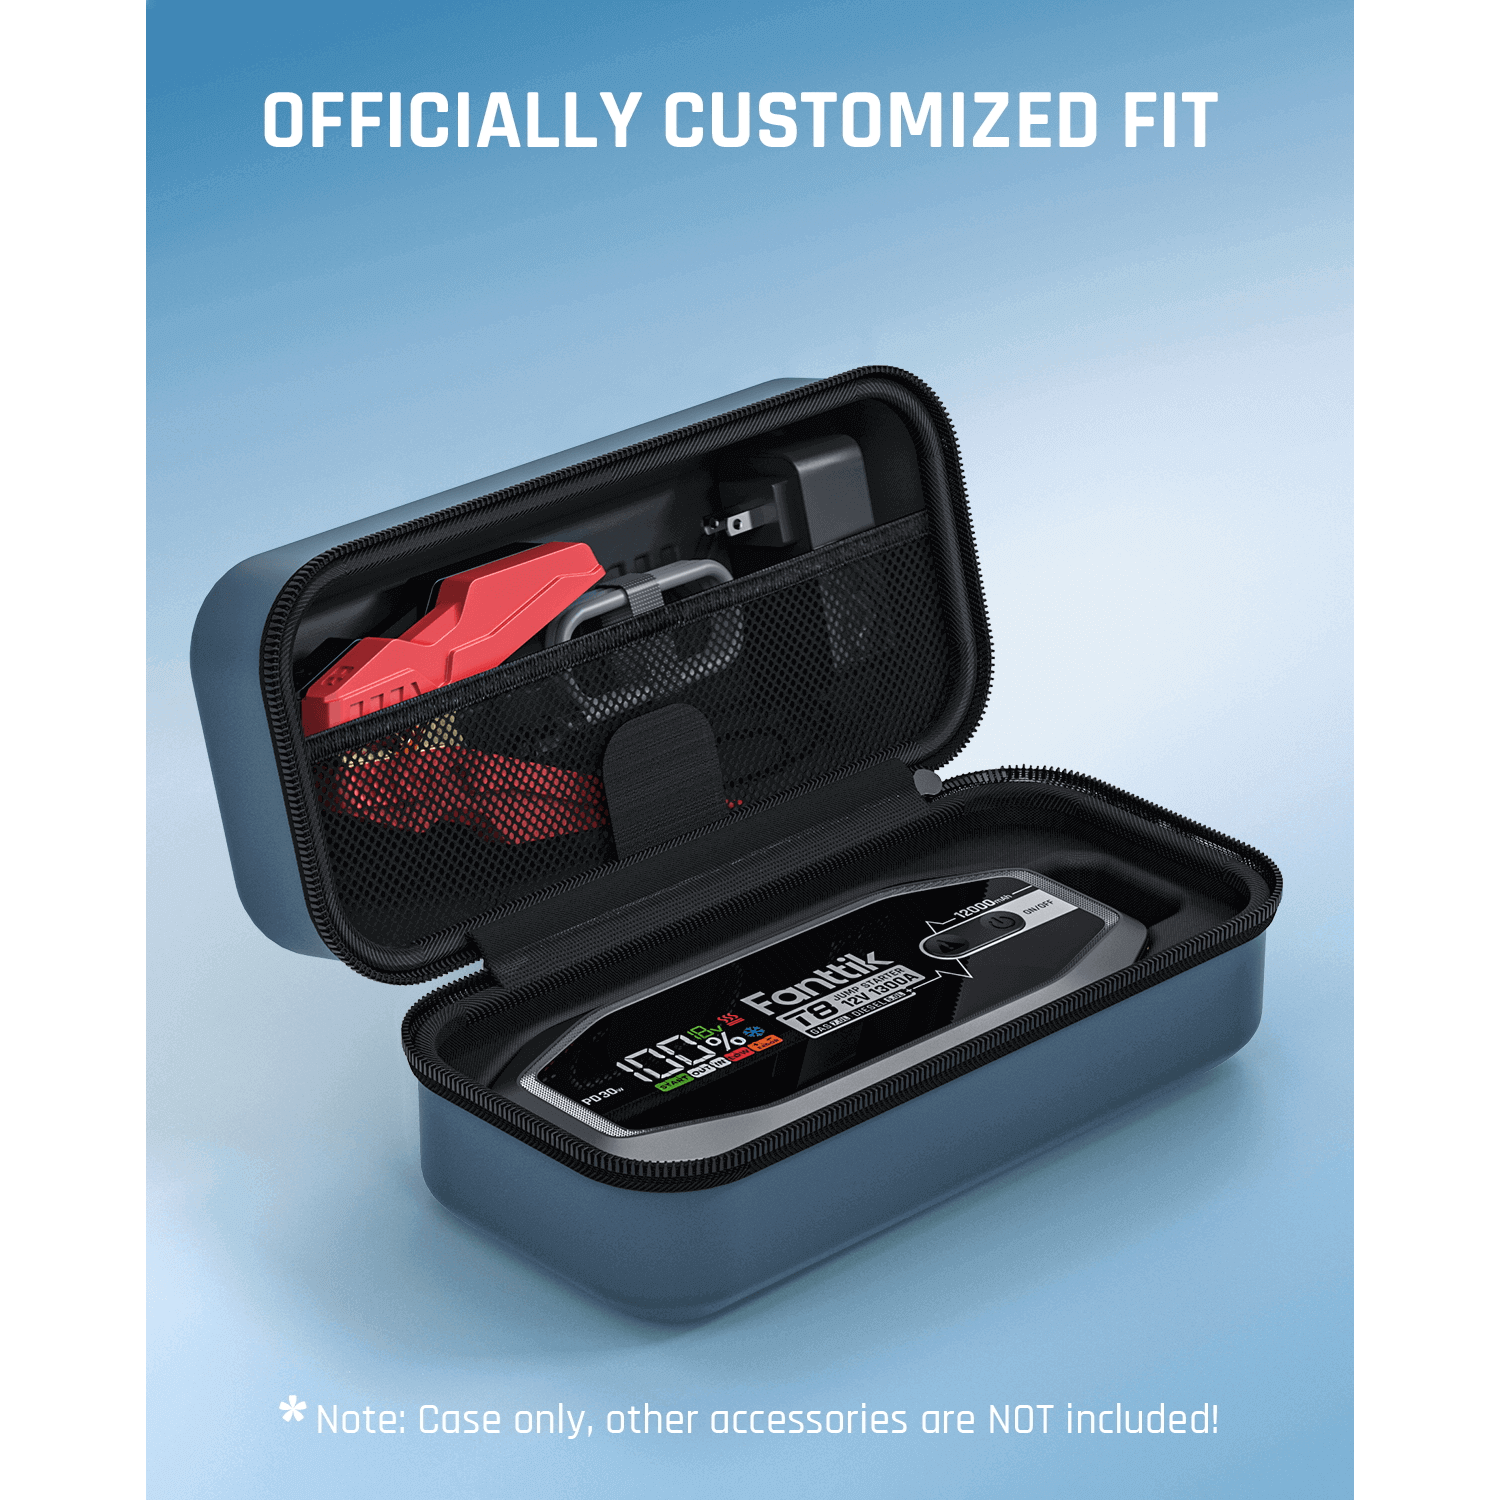 Particularly designed for Fanttik T8 MAX jump starter, this car battery pack storage case is dedicated to protecting your T8 MAX jump starter and other related accessories.